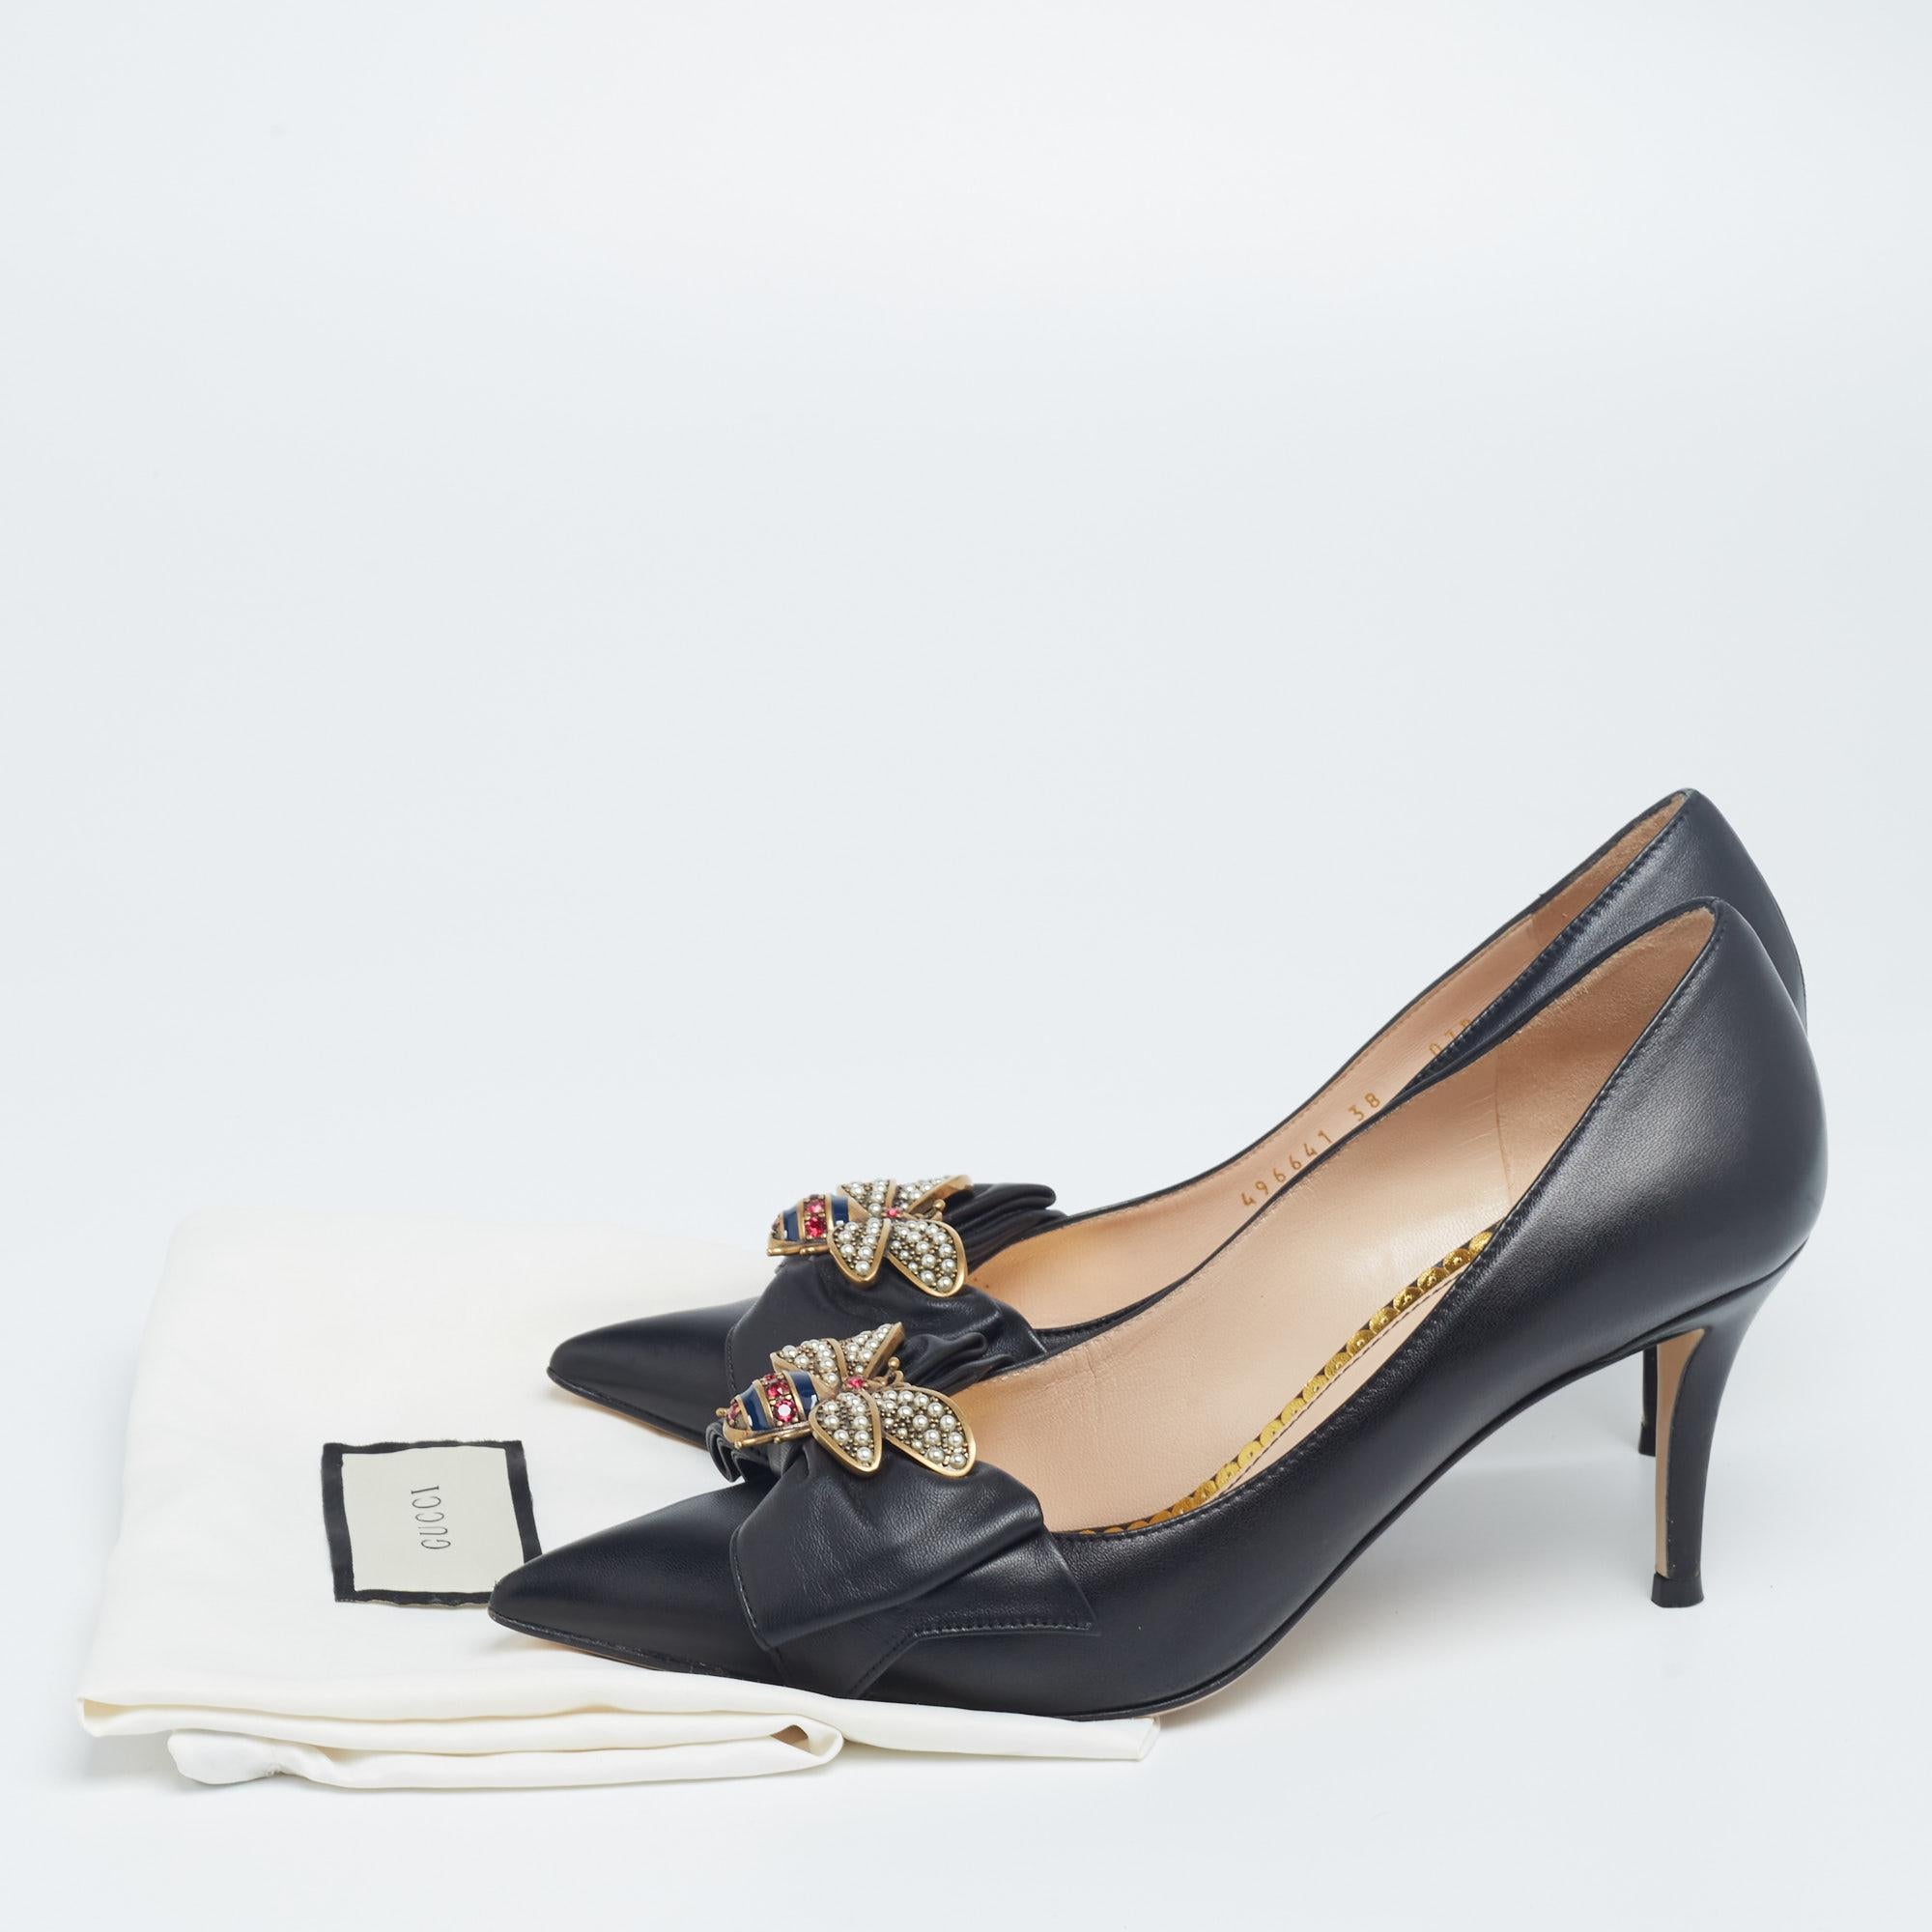 Gucci Black Leather Bee Embellished Bow Pumps Size 38 2